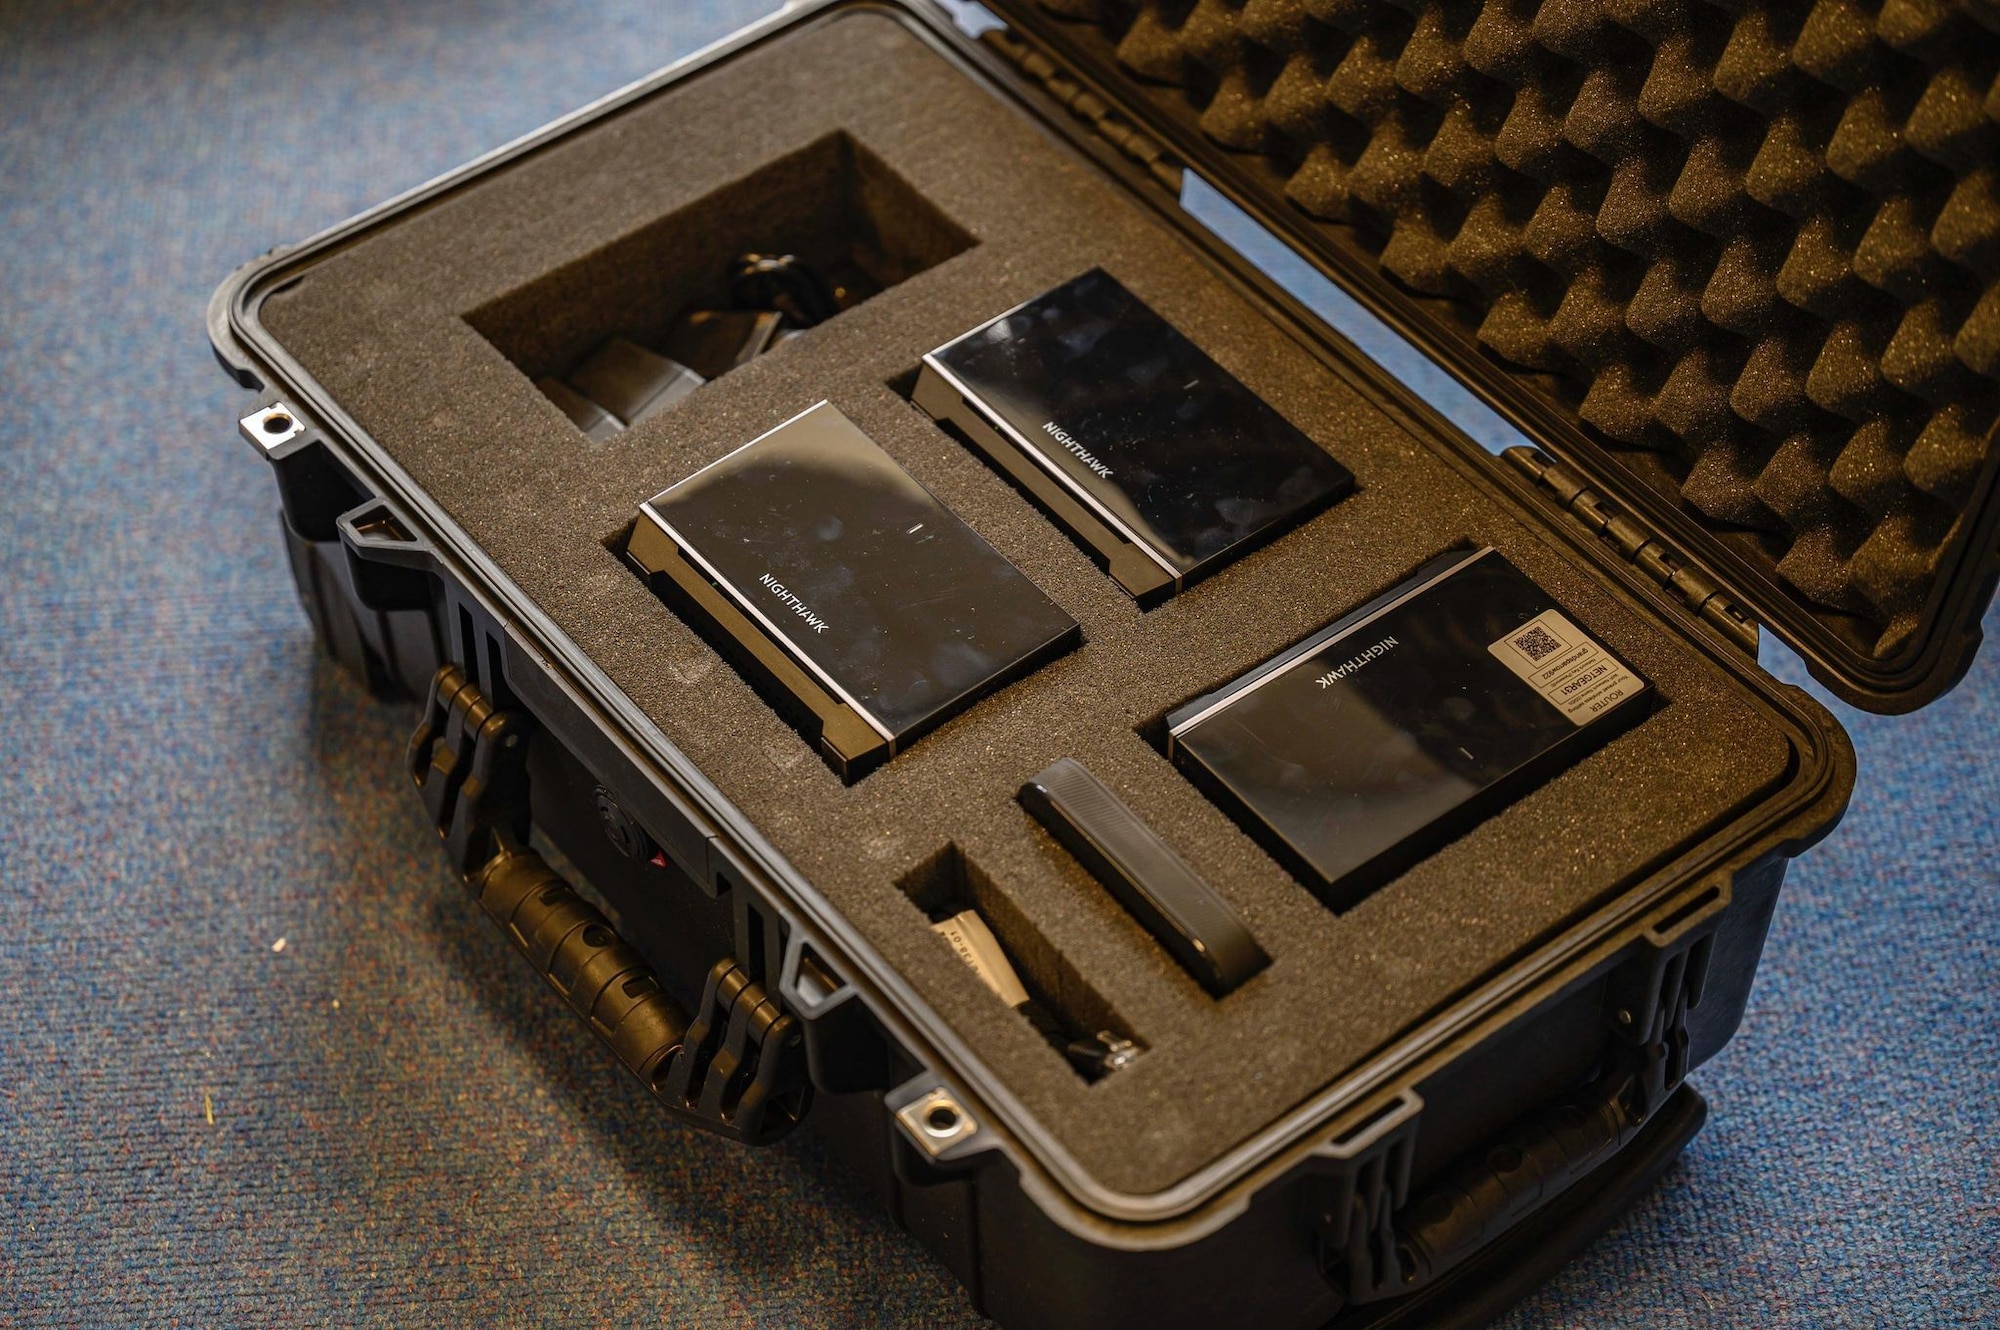 The first iteration of the Project: Go-Comm portable communications kit sits ready for use in October 2021. The prototype kit was built with commercially available parts and can be set up in under 20 minutes without specialized training or personnel to operate. (U.S. Air Force photo by Airman 1st Class Josiah Brown)